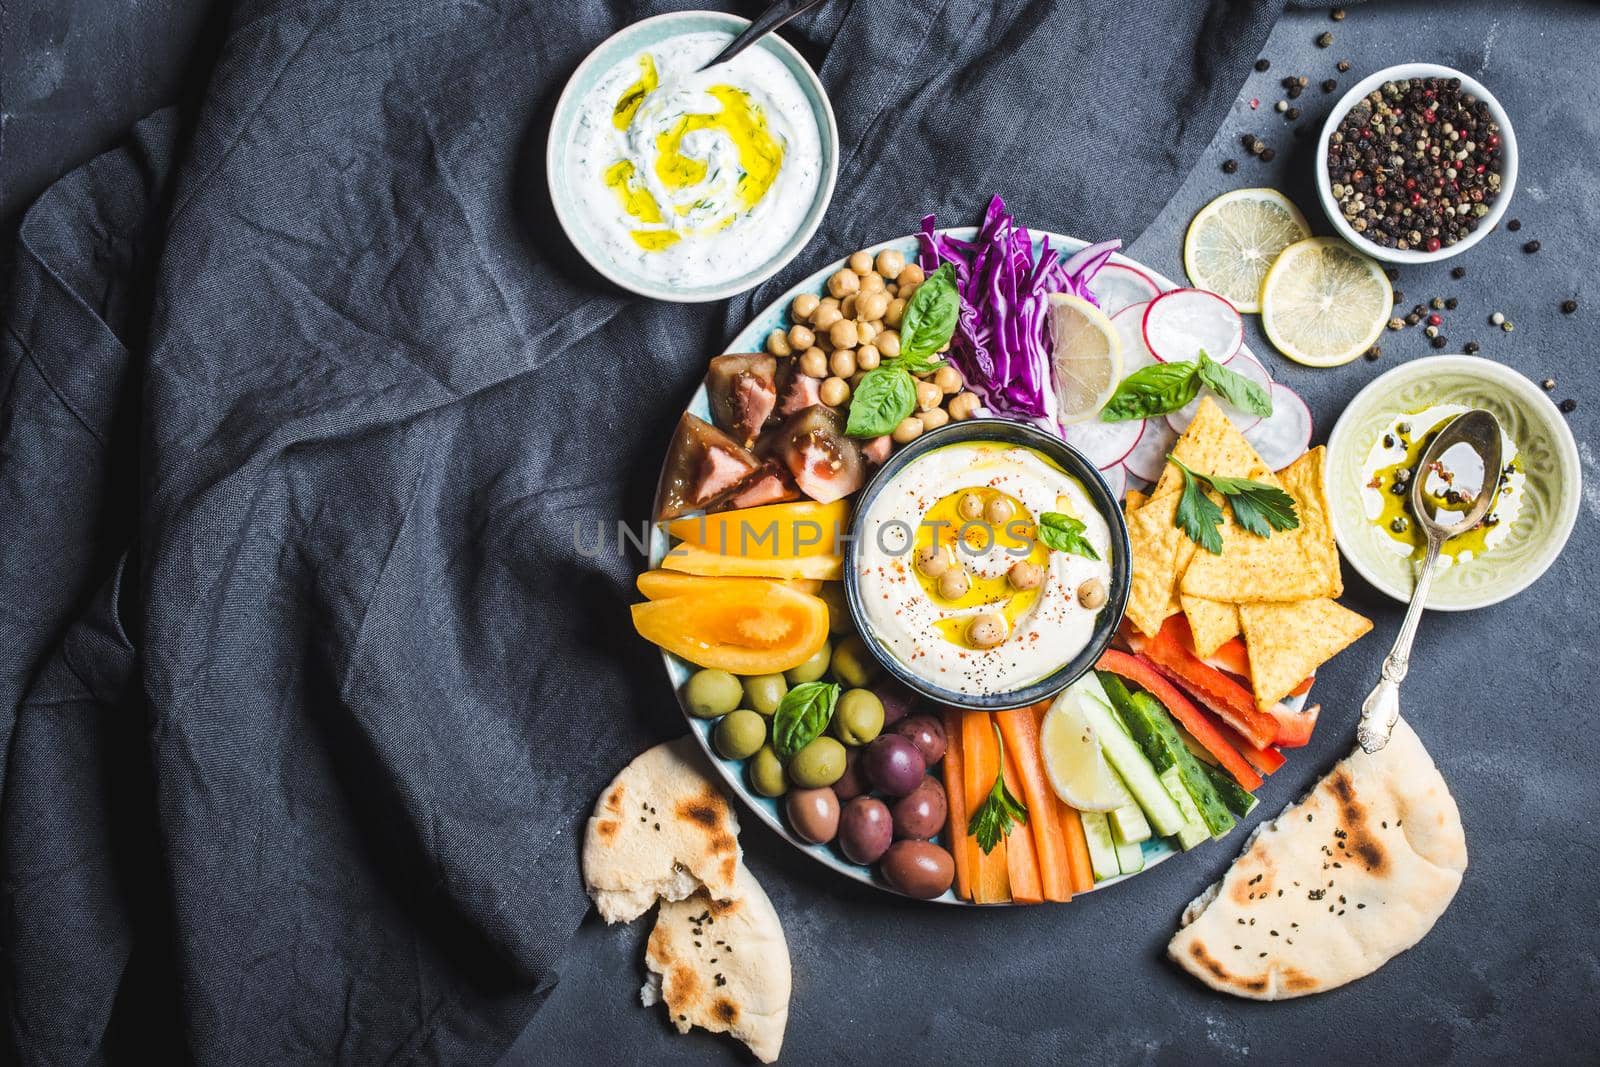 Meze platter with hummus, yoghurt dip, assorted snacks. Space for text. Hummus, vegetables sticks, chickpeas, olives, pita, chips. Plate, Middle Eastern/Mediterranean meze. Party/finger food. Top view